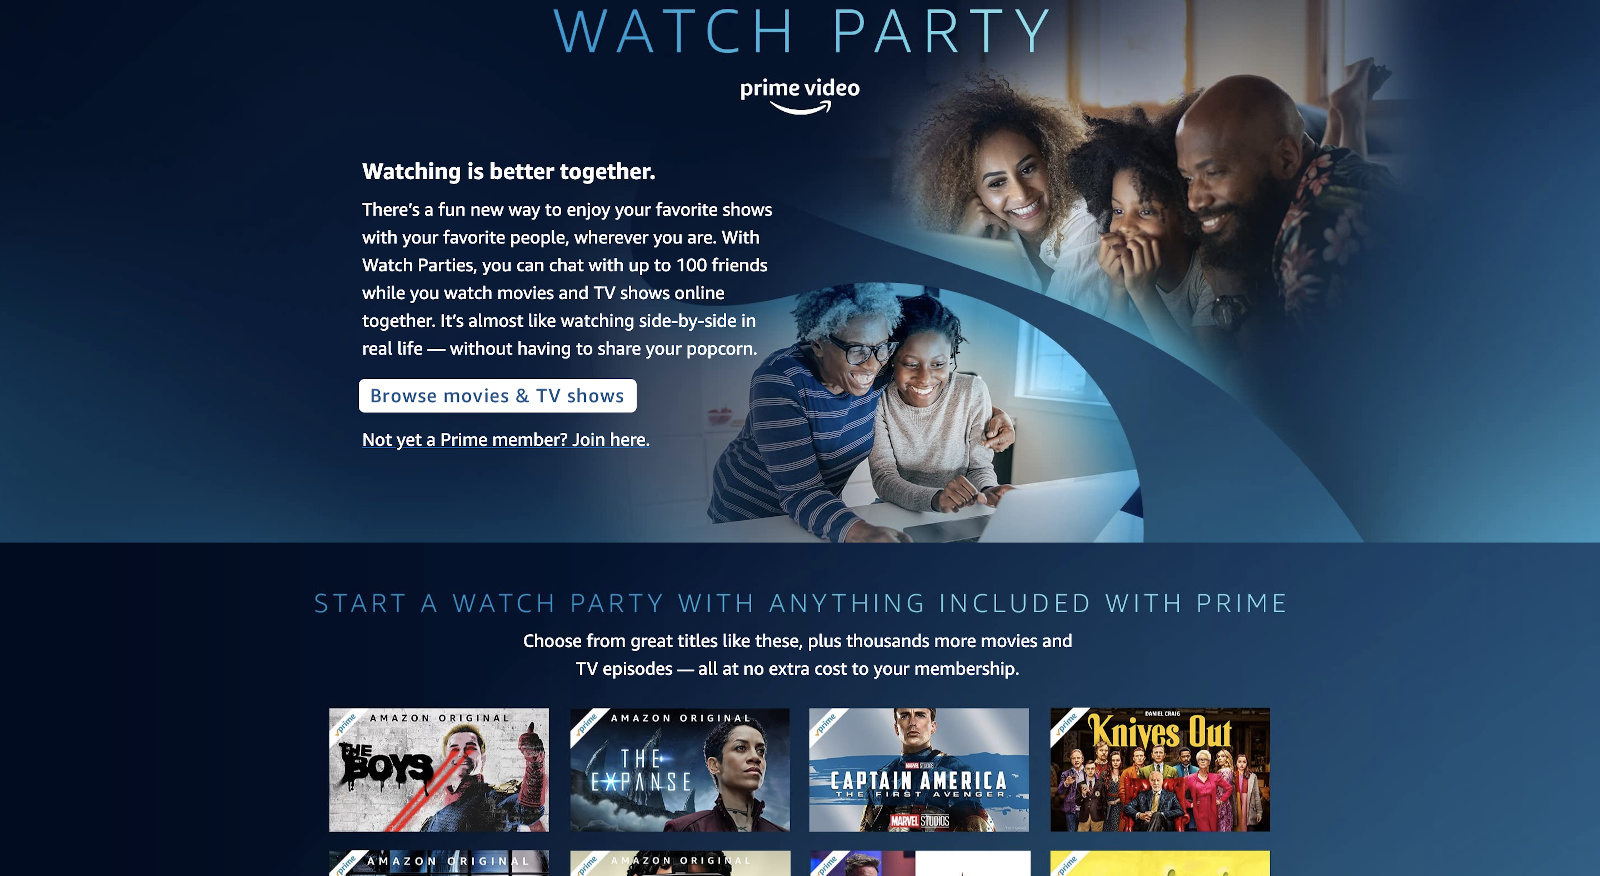 Amazon Released Watch Party In India For Prime Video